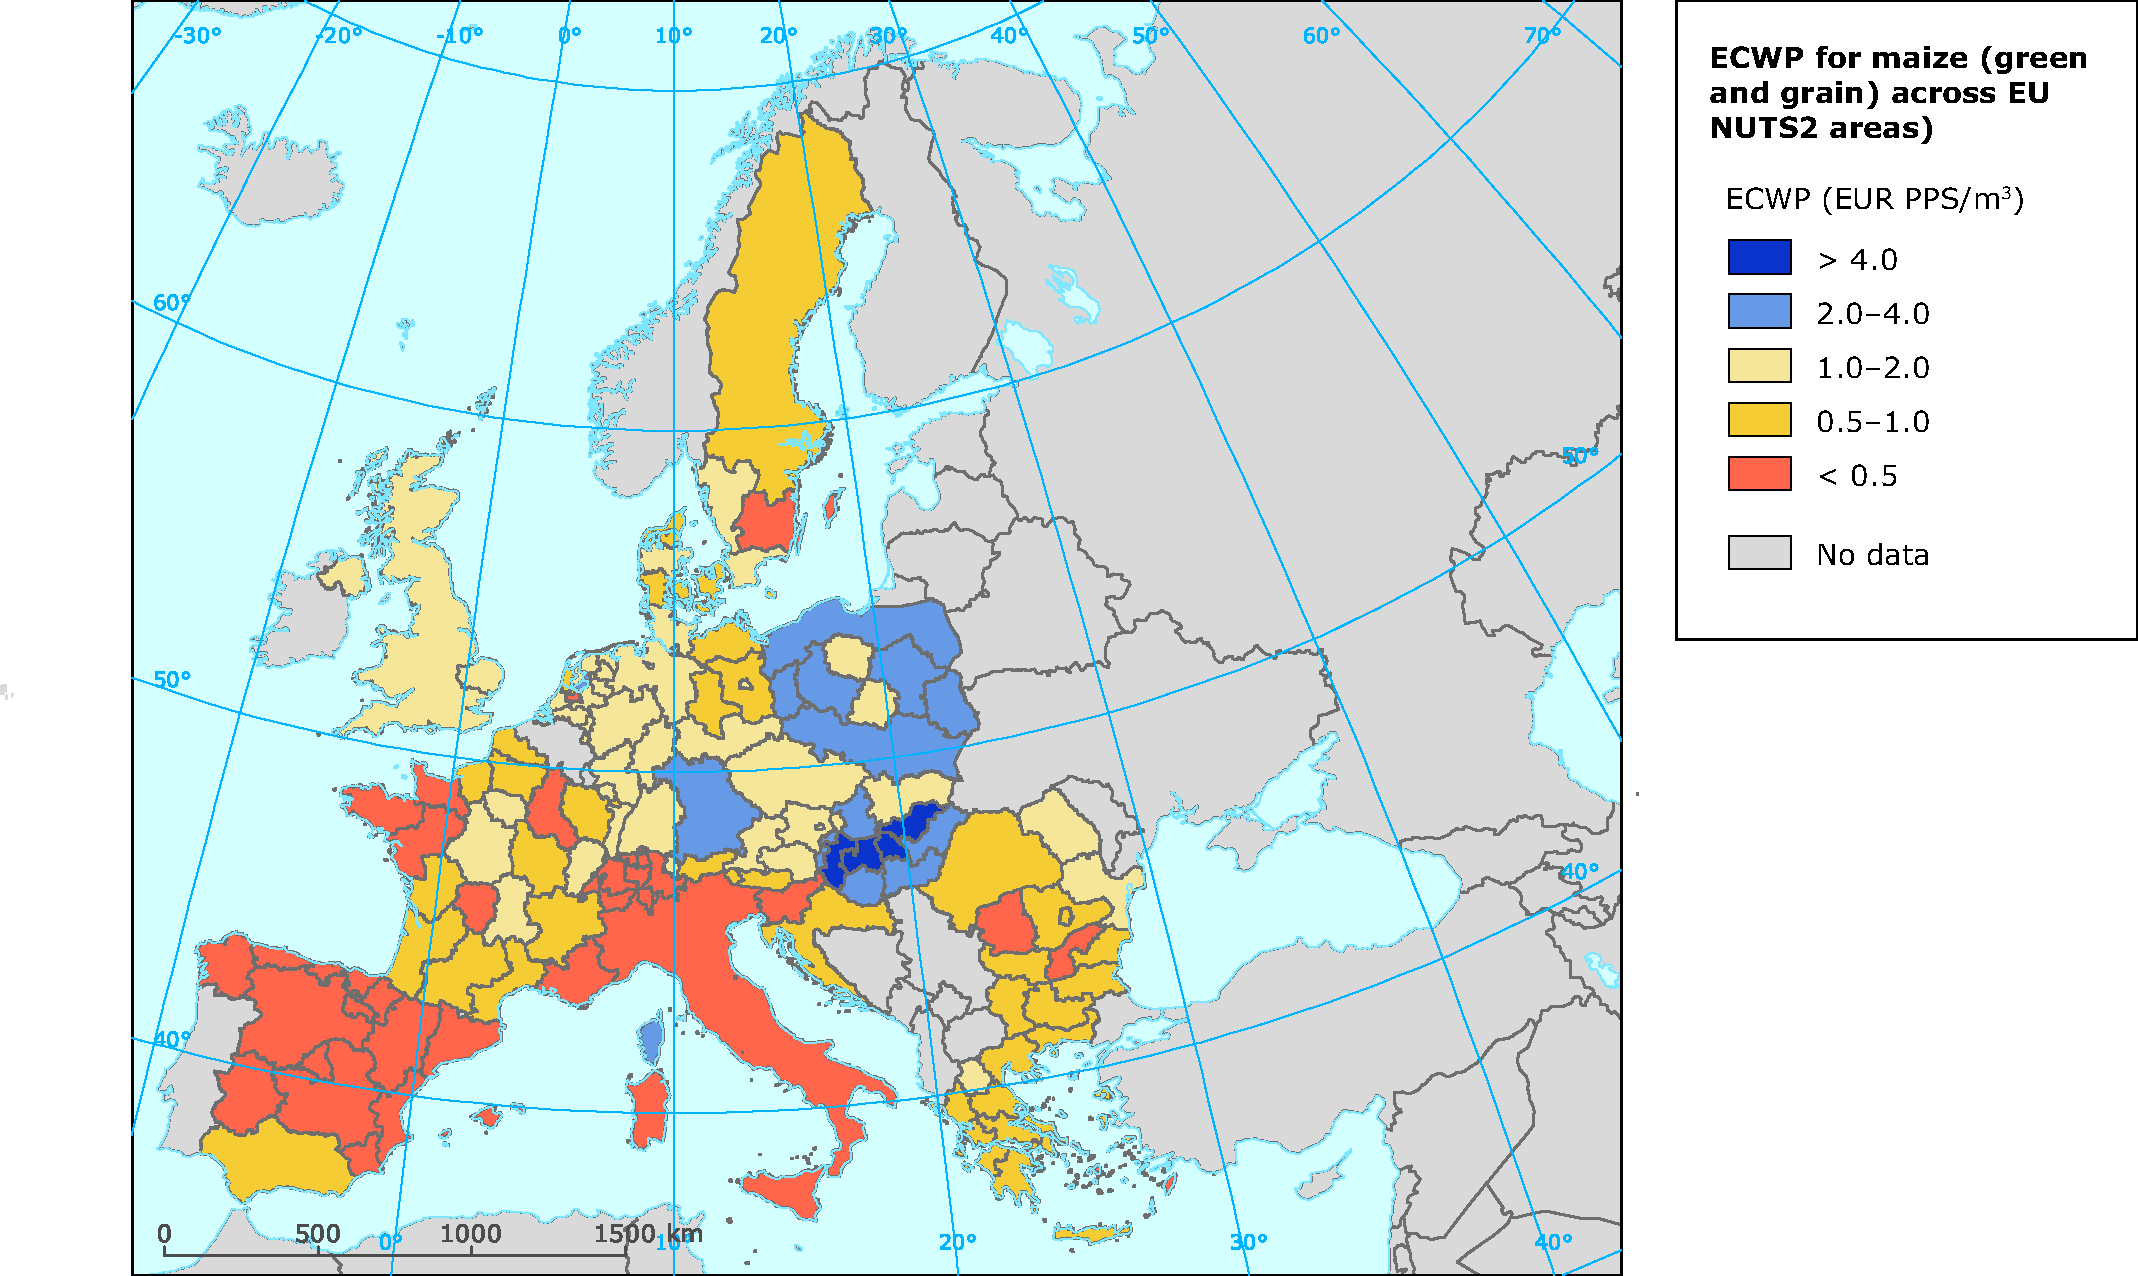 ECWP (in € PPS/m3) for maize (green and grain) across EU NUTS2 areas